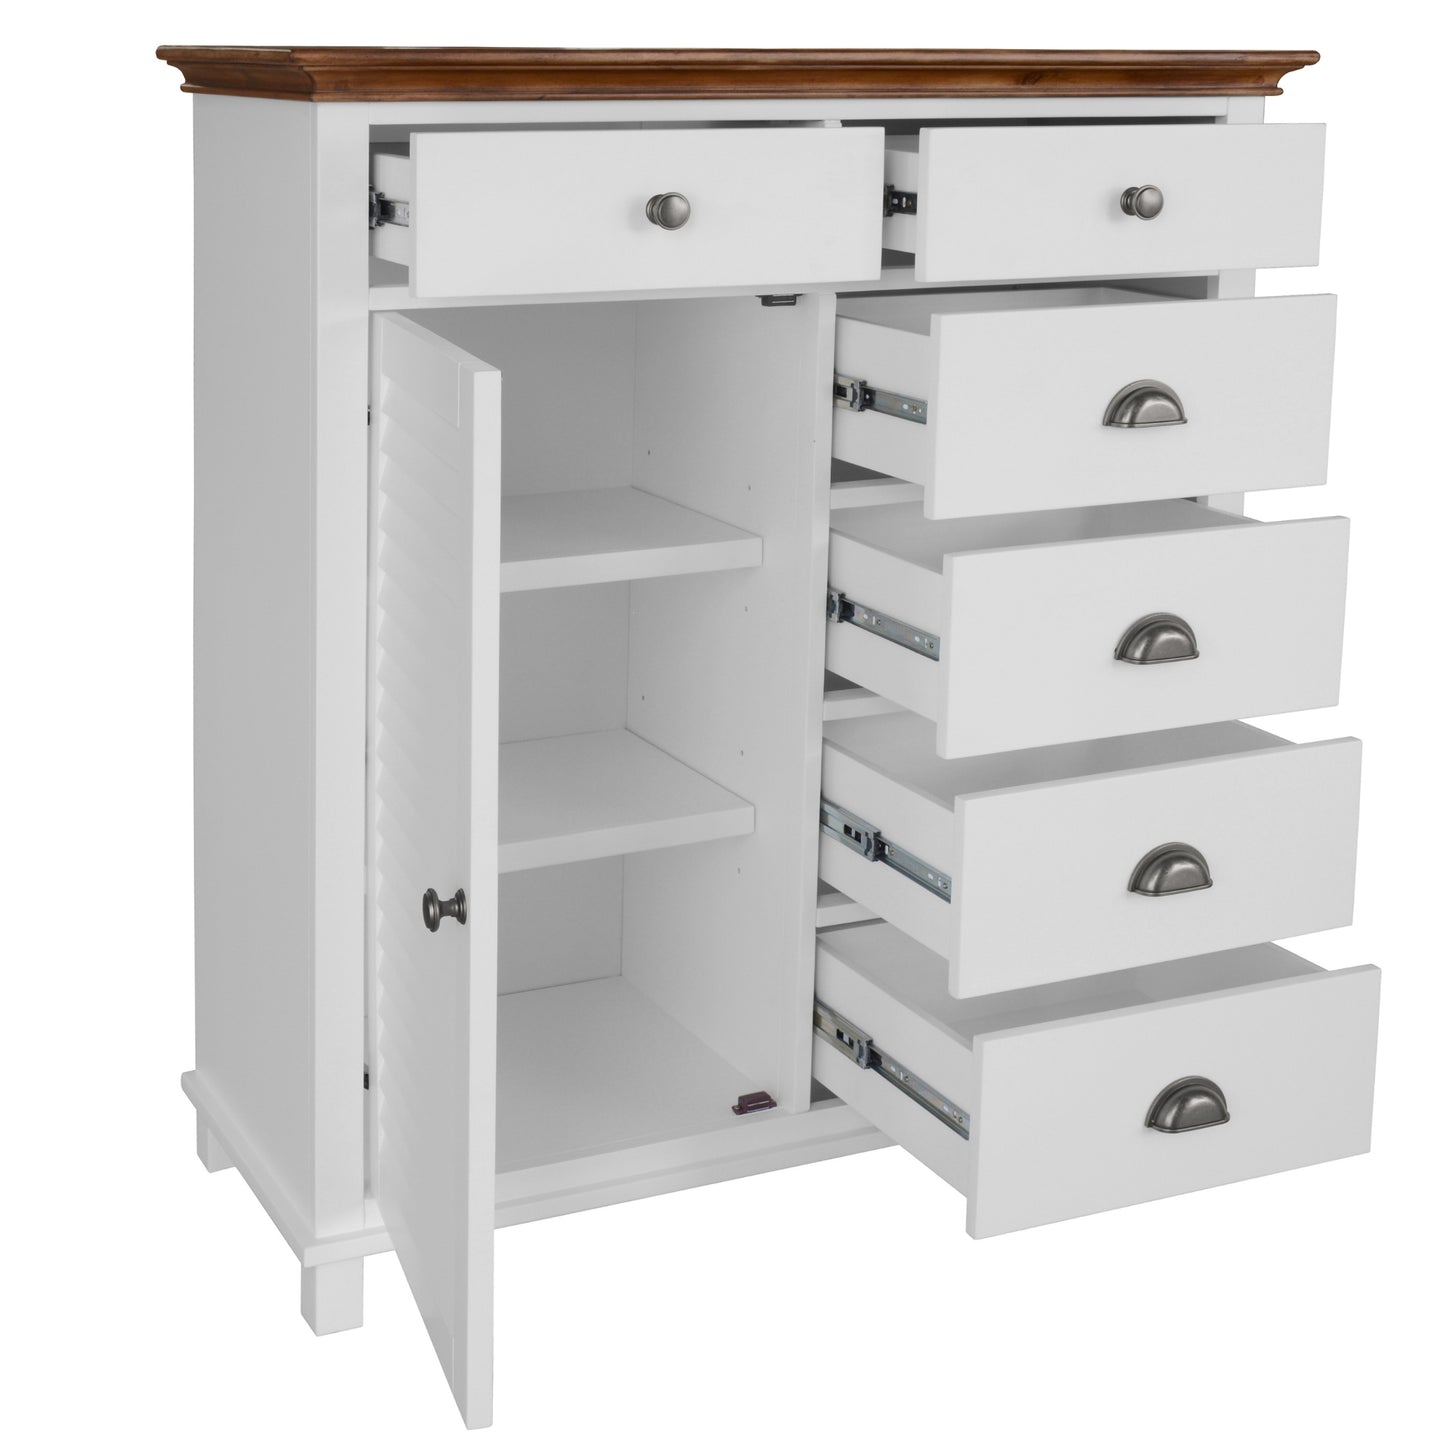 Virginia Tallboy 6 Chest of Drawers Solid Pine Wood Bed Storage Cabinet - White